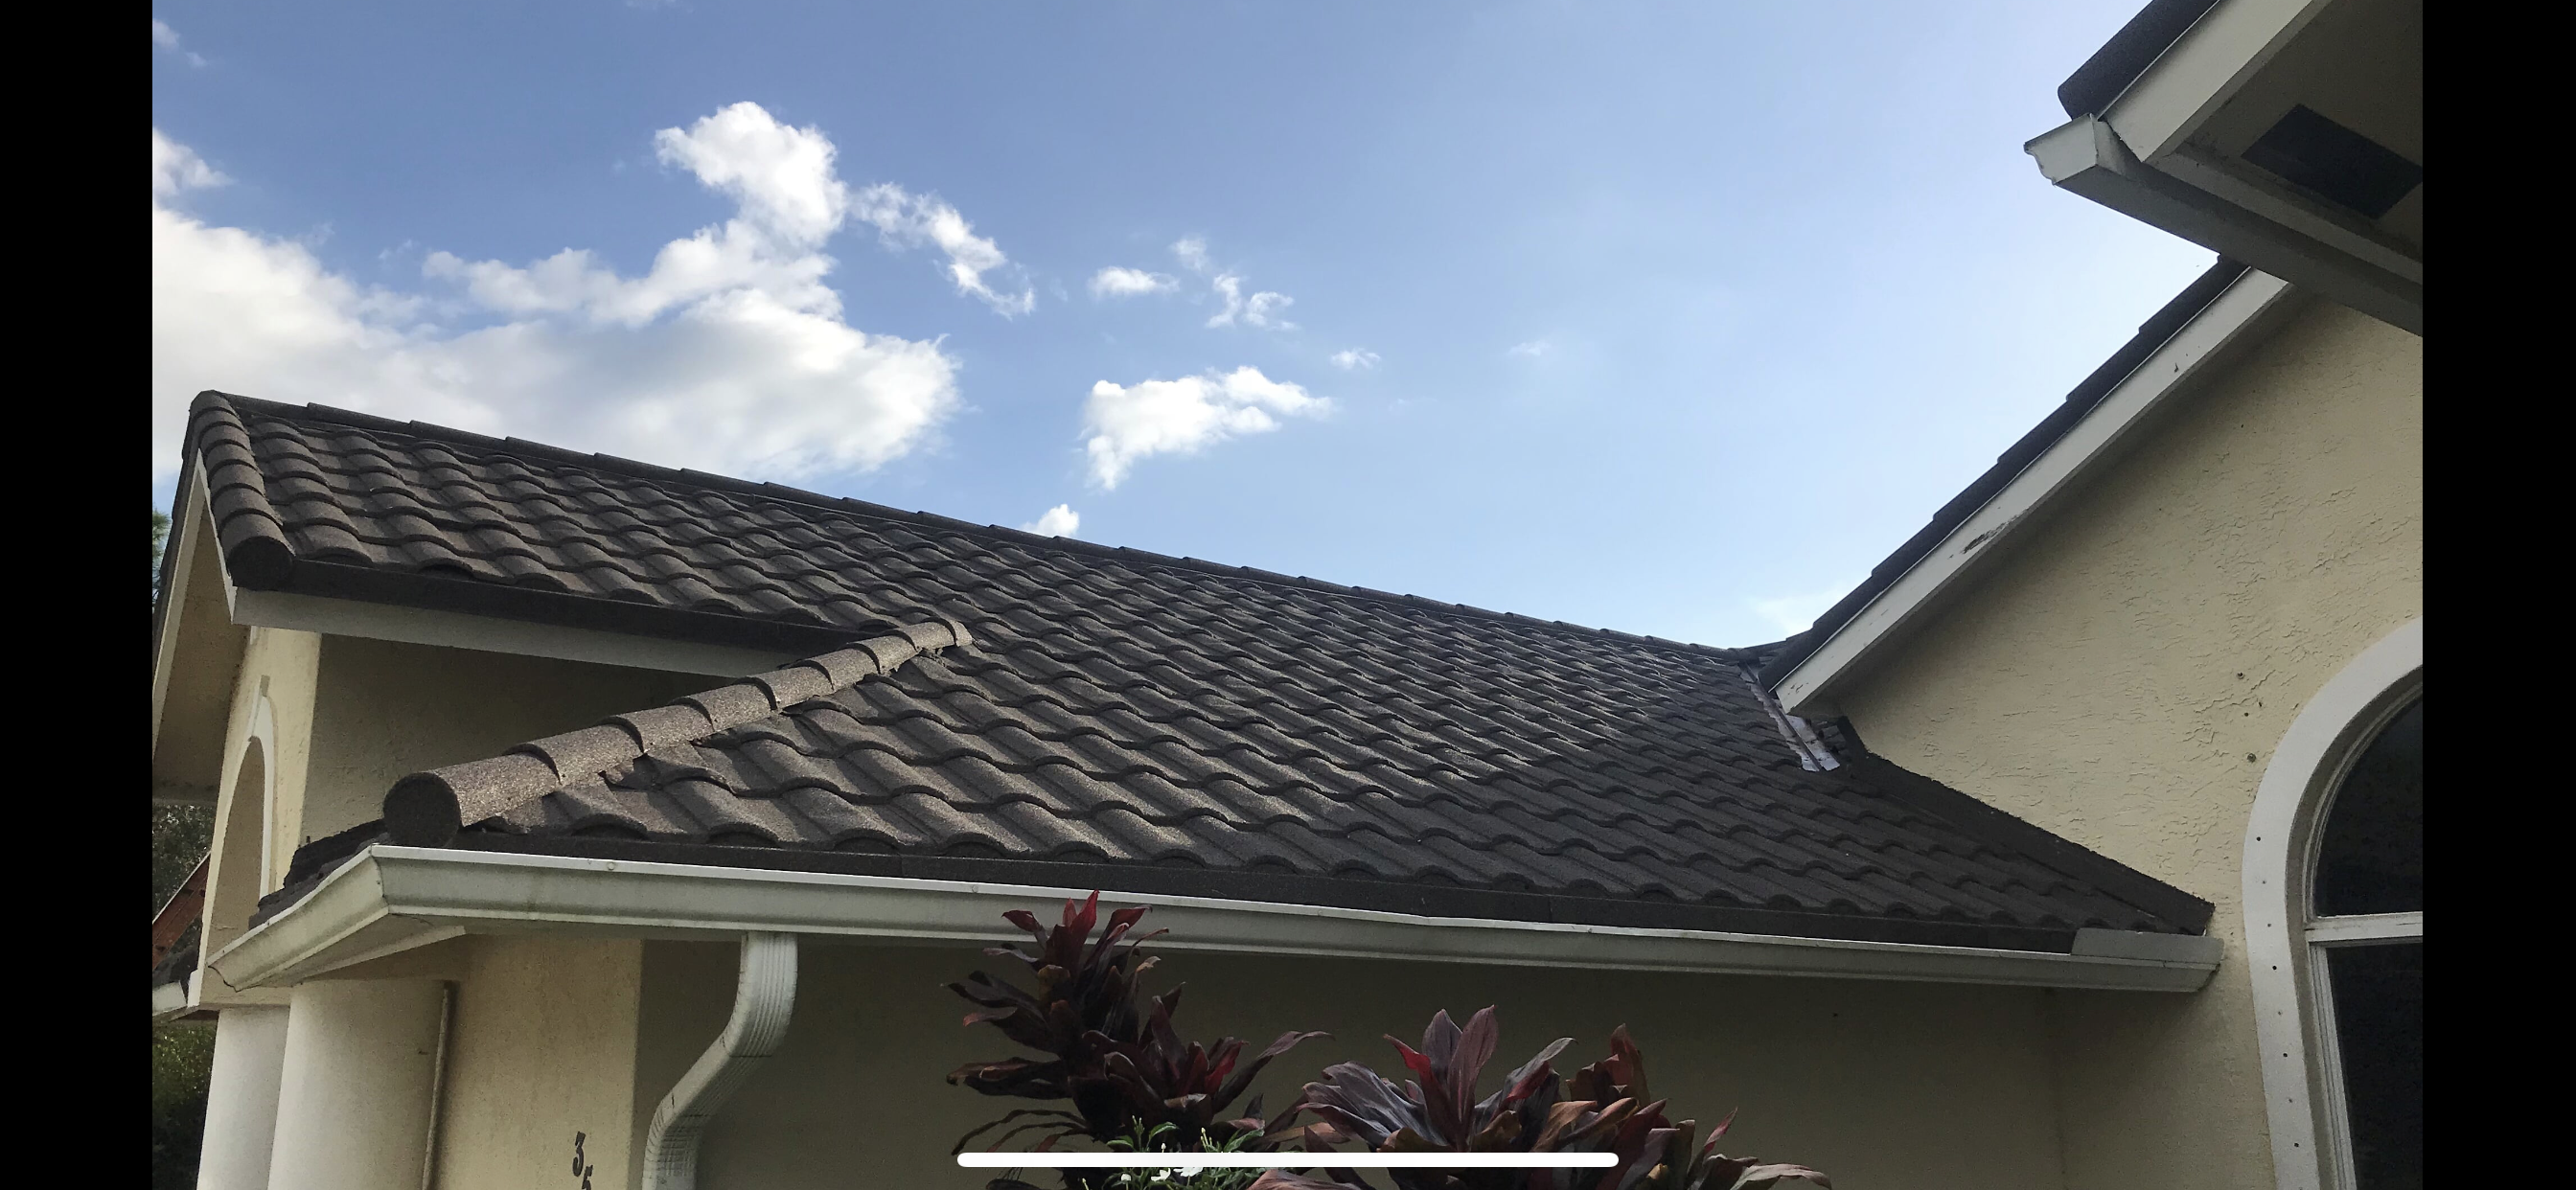 Roofing Experts, Inc. Tile Project Completed